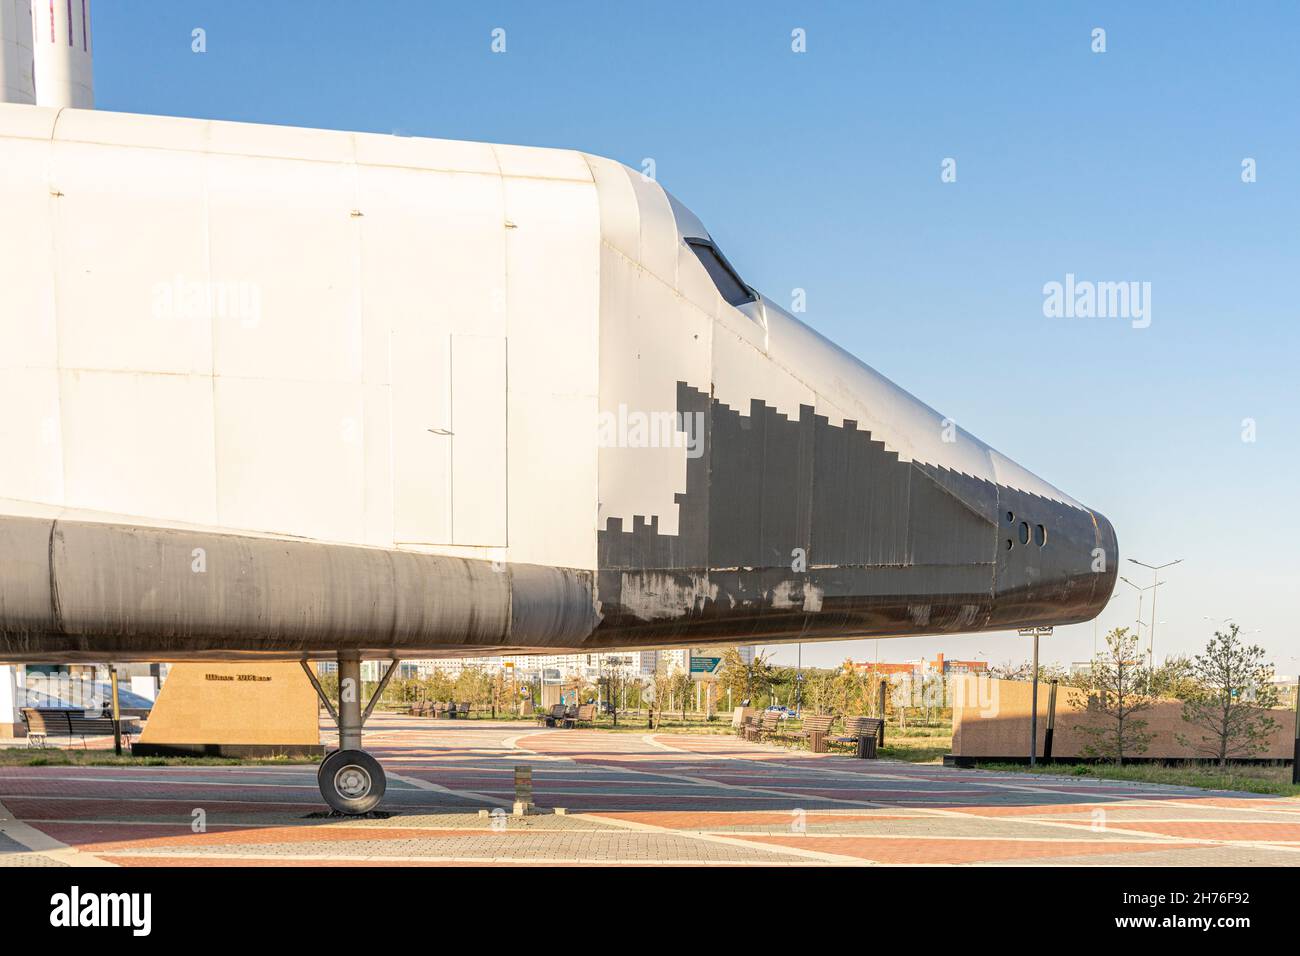 Buran life-size model- the first spaceplane as part of the Soviet/Russian Buran programme. National Space Center, Astana, Nur-Sultan, Kazakhstan Stock Photo